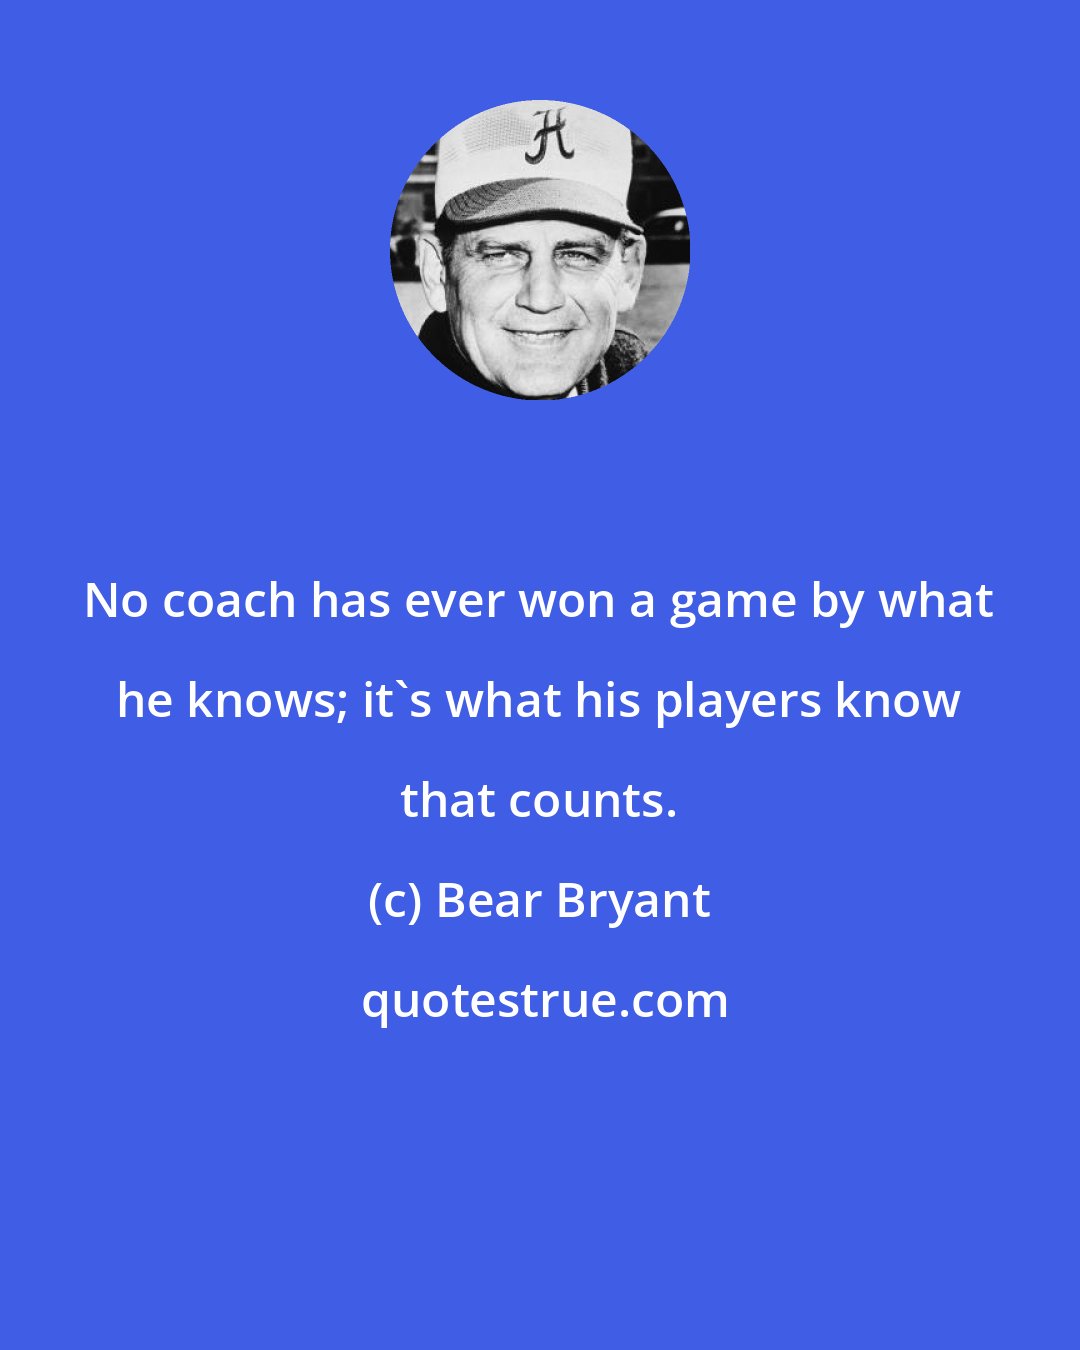 Bear Bryant: No coach has ever won a game by what he knows; it's what his players know that counts.